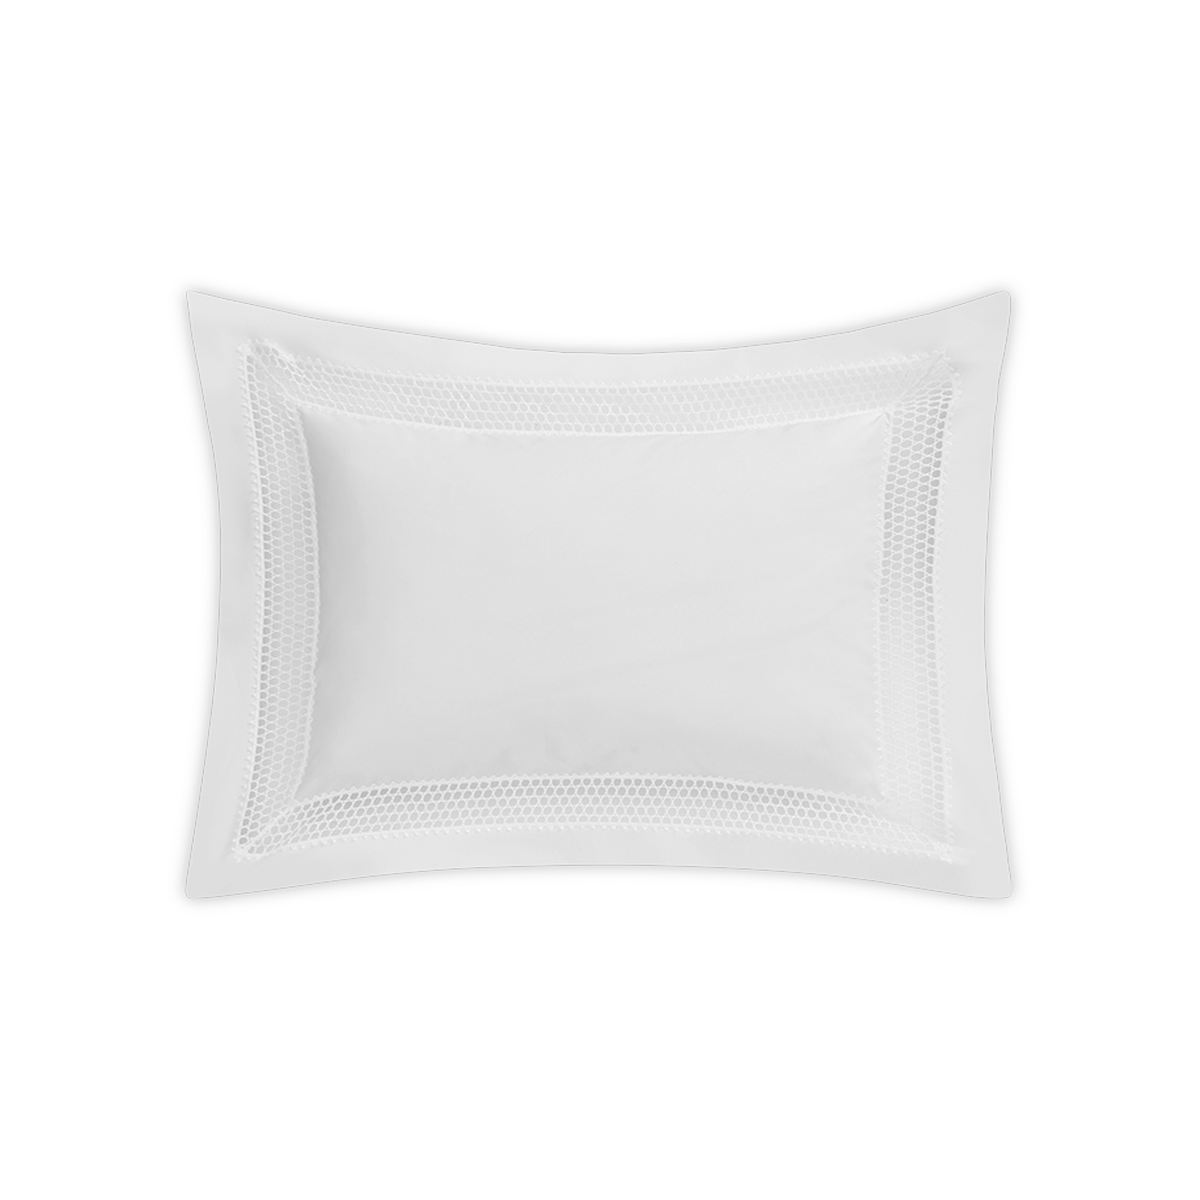 Clear Image of Matouk Cecily Boudoir Sham in White Color